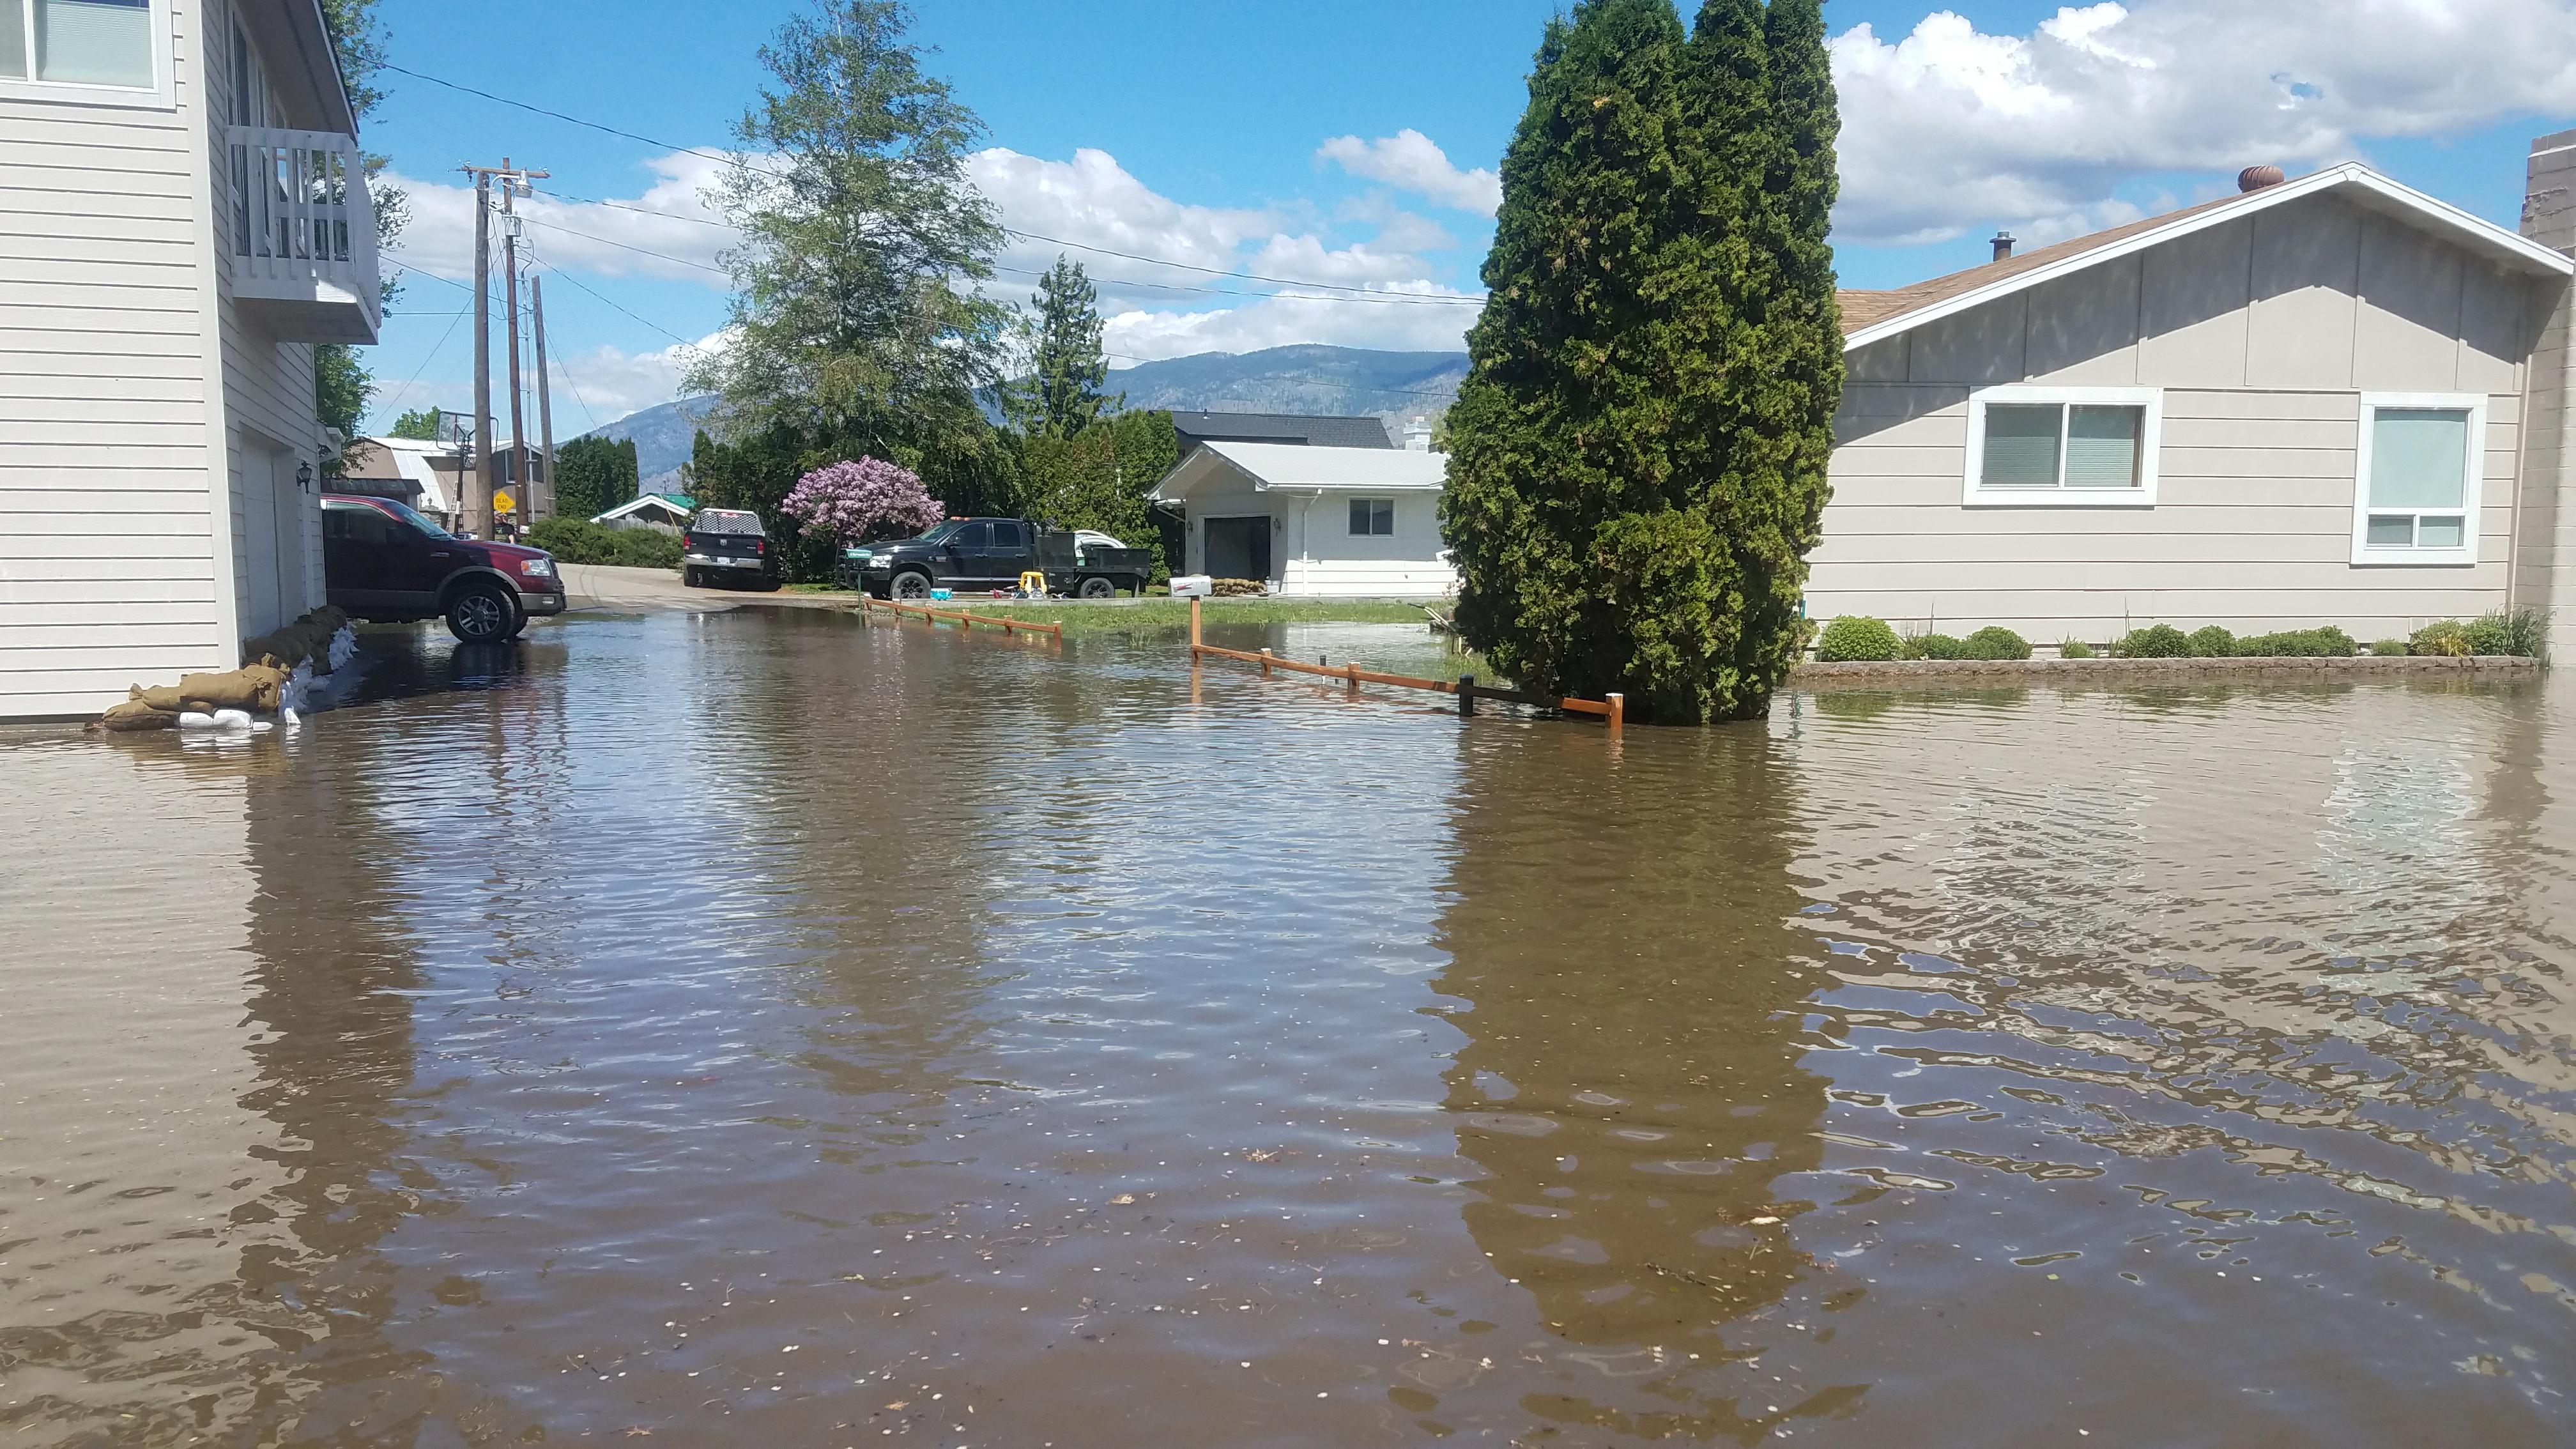 Rapidly melting snow causes flooding in Okanogan County forcing dozens